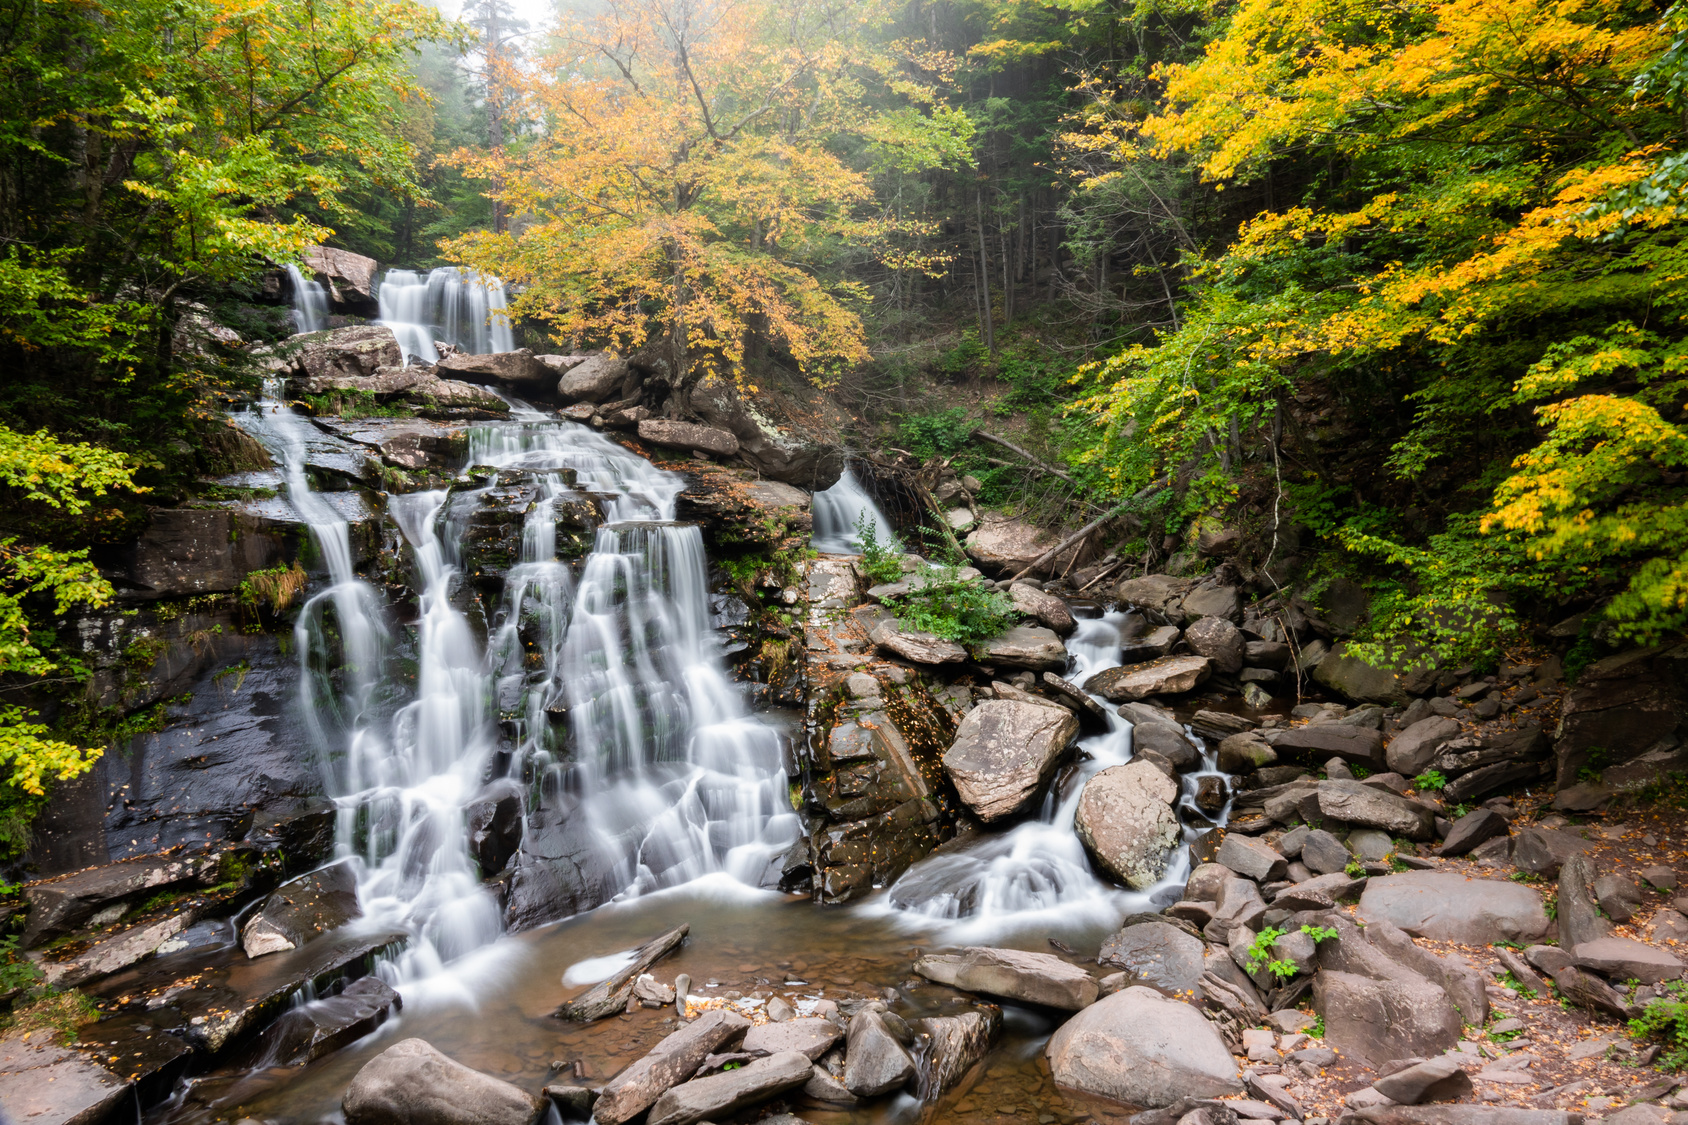 The Best Places To See Stunning Fall Colors In The U.S.